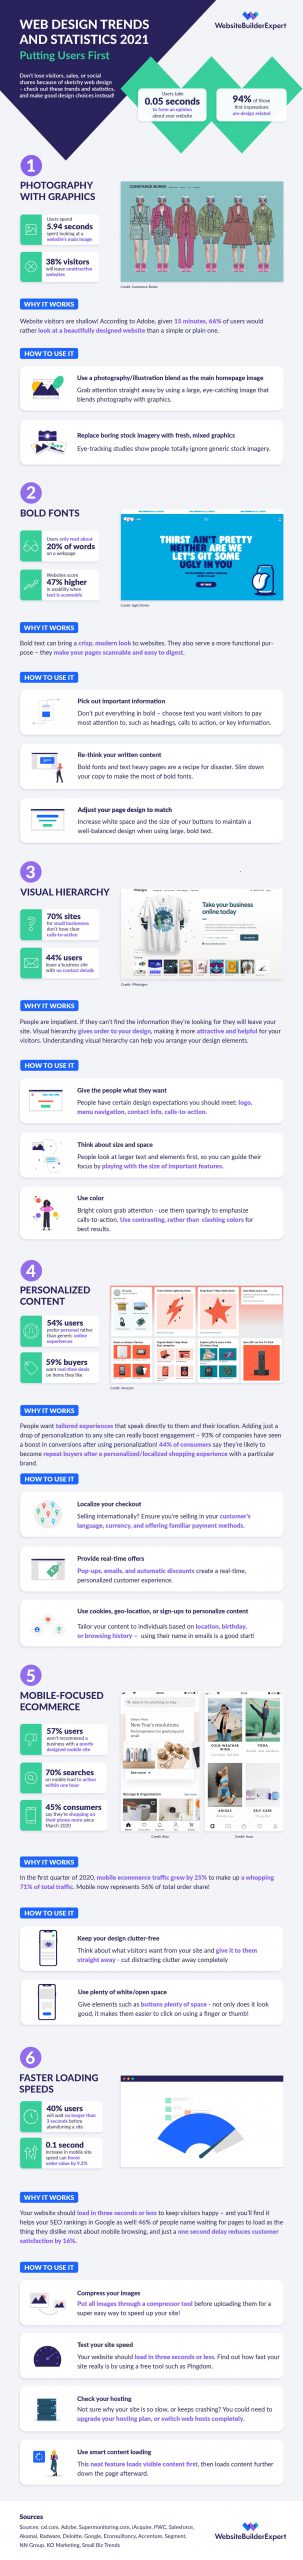 web design trends and statistics 2021 infographic scaled 1